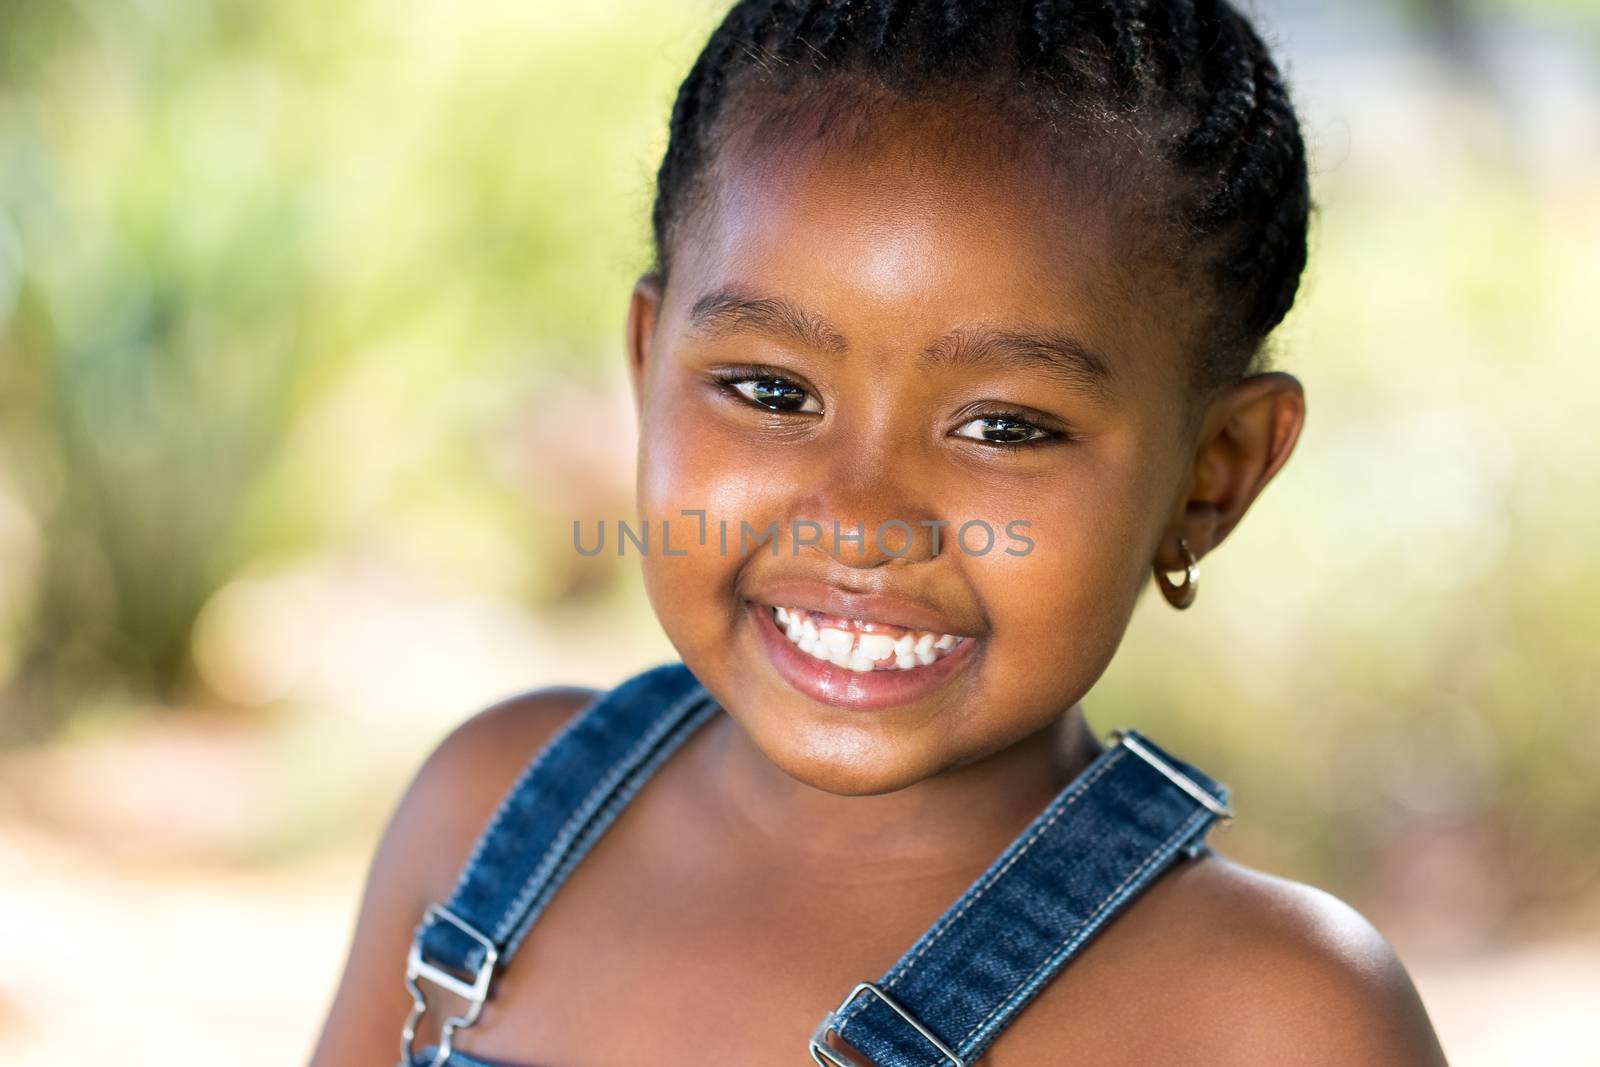 Smiling african youngster outdoors. by karelnoppe